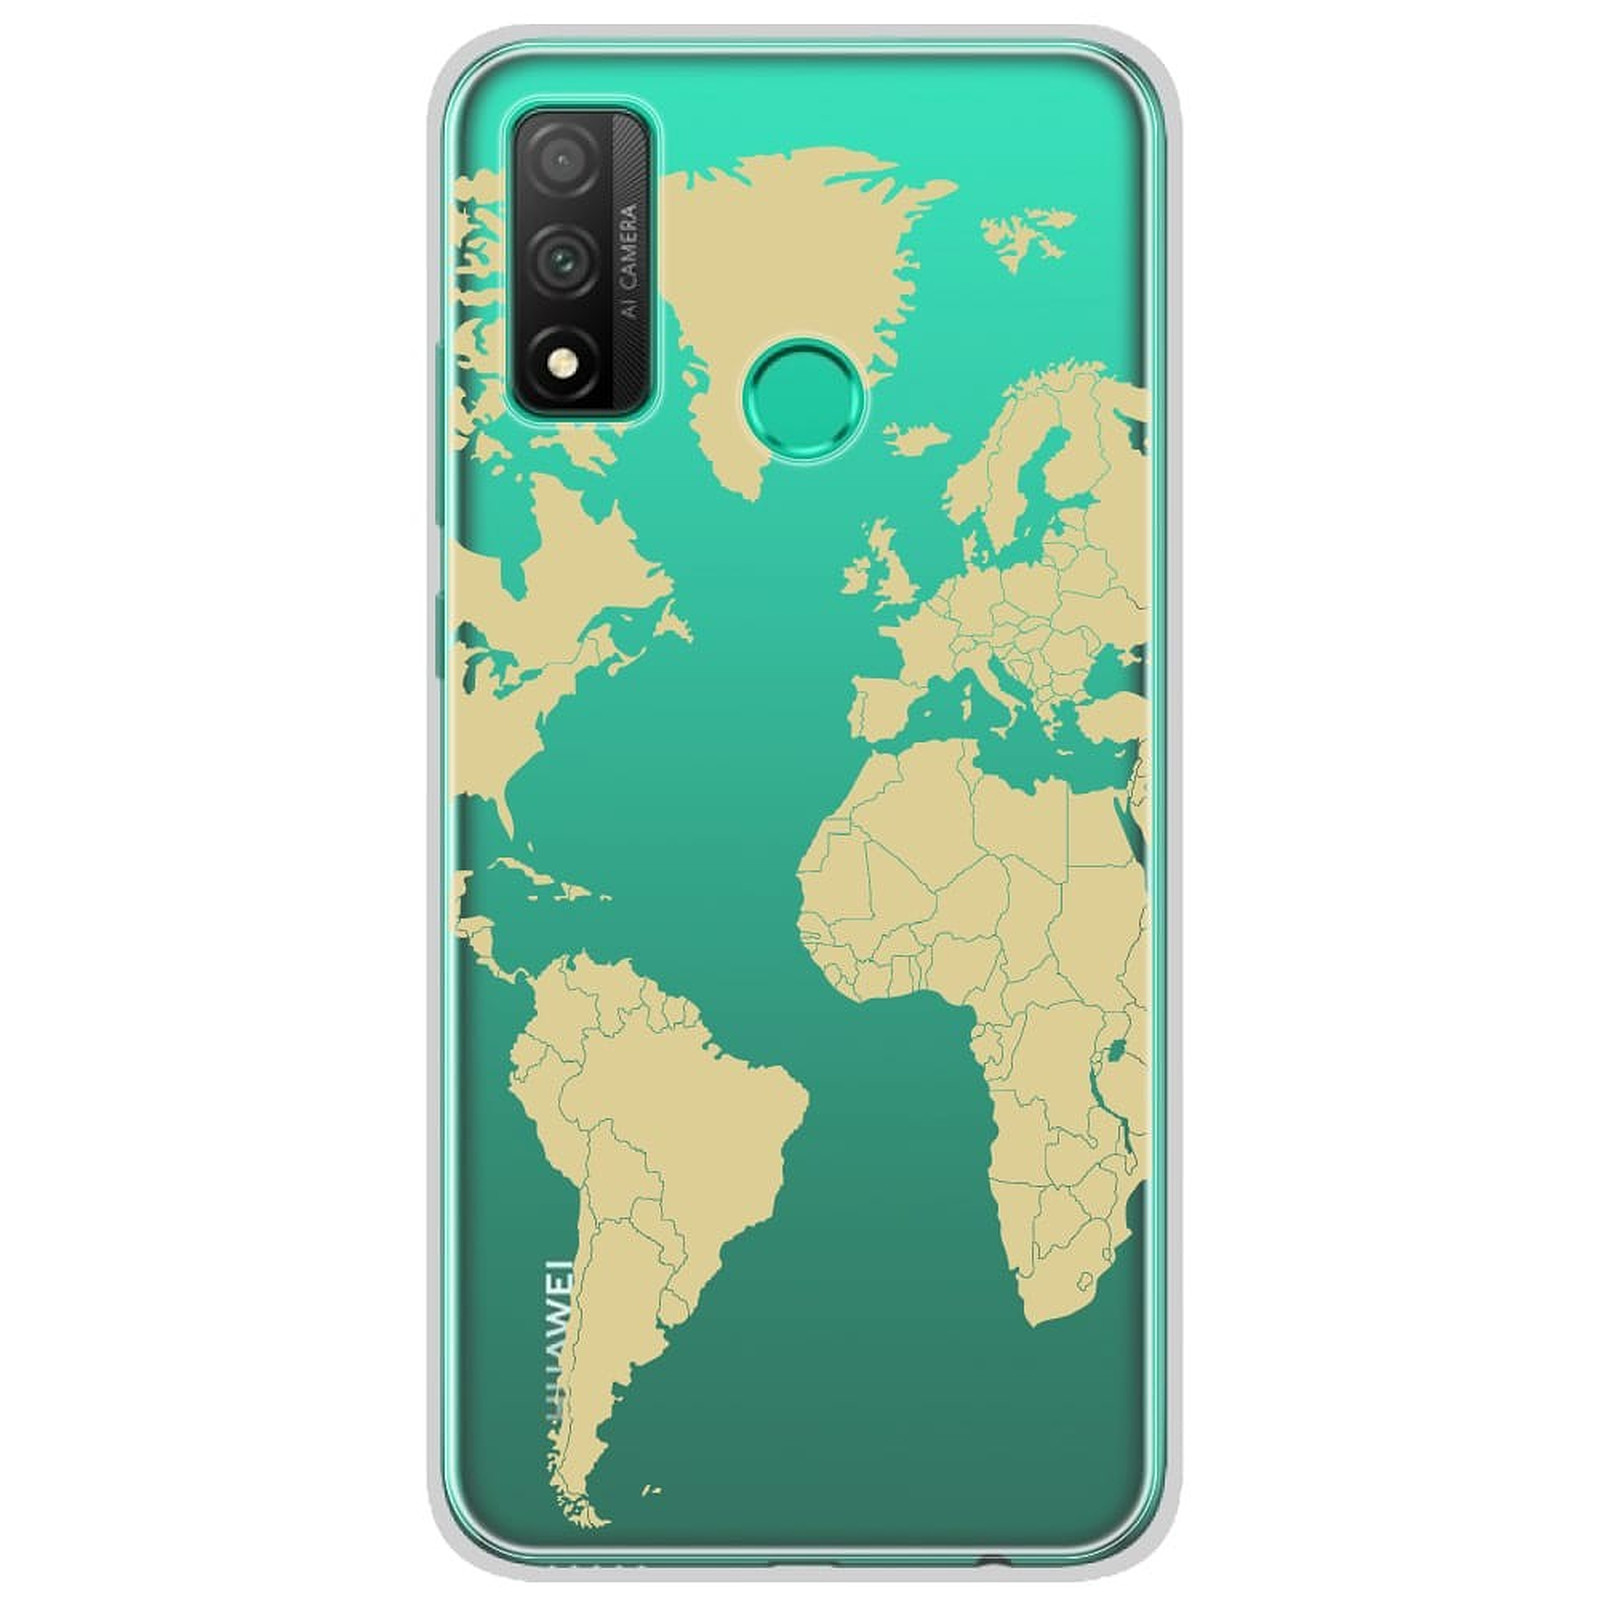 1001 Coques Coque silicone gel Huawei P Smart 2020 motif Map beige - Coque telephone 1001Coques